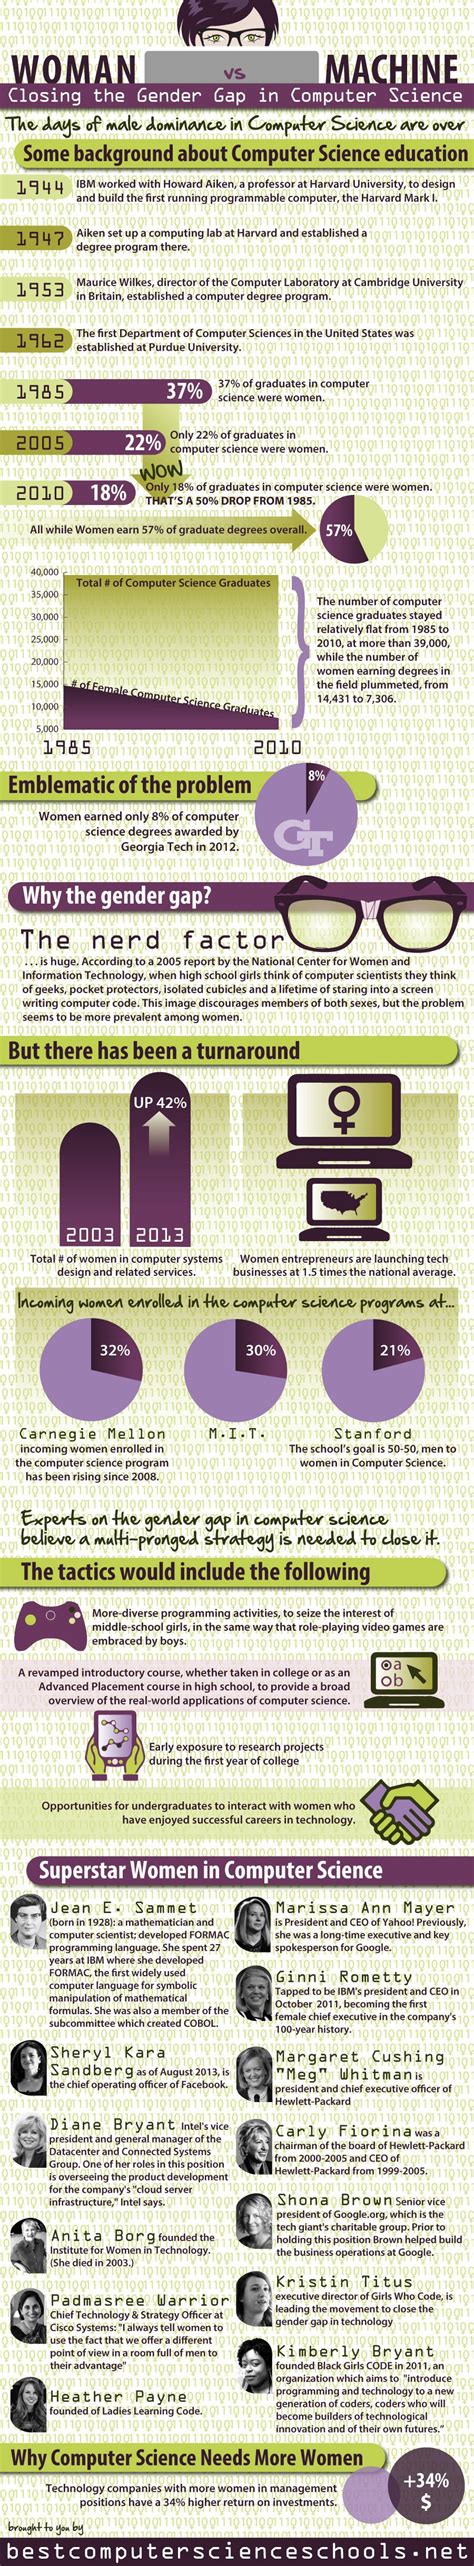 Computer Science Teacher Closing The Gender Gap In Computer Science Infographic